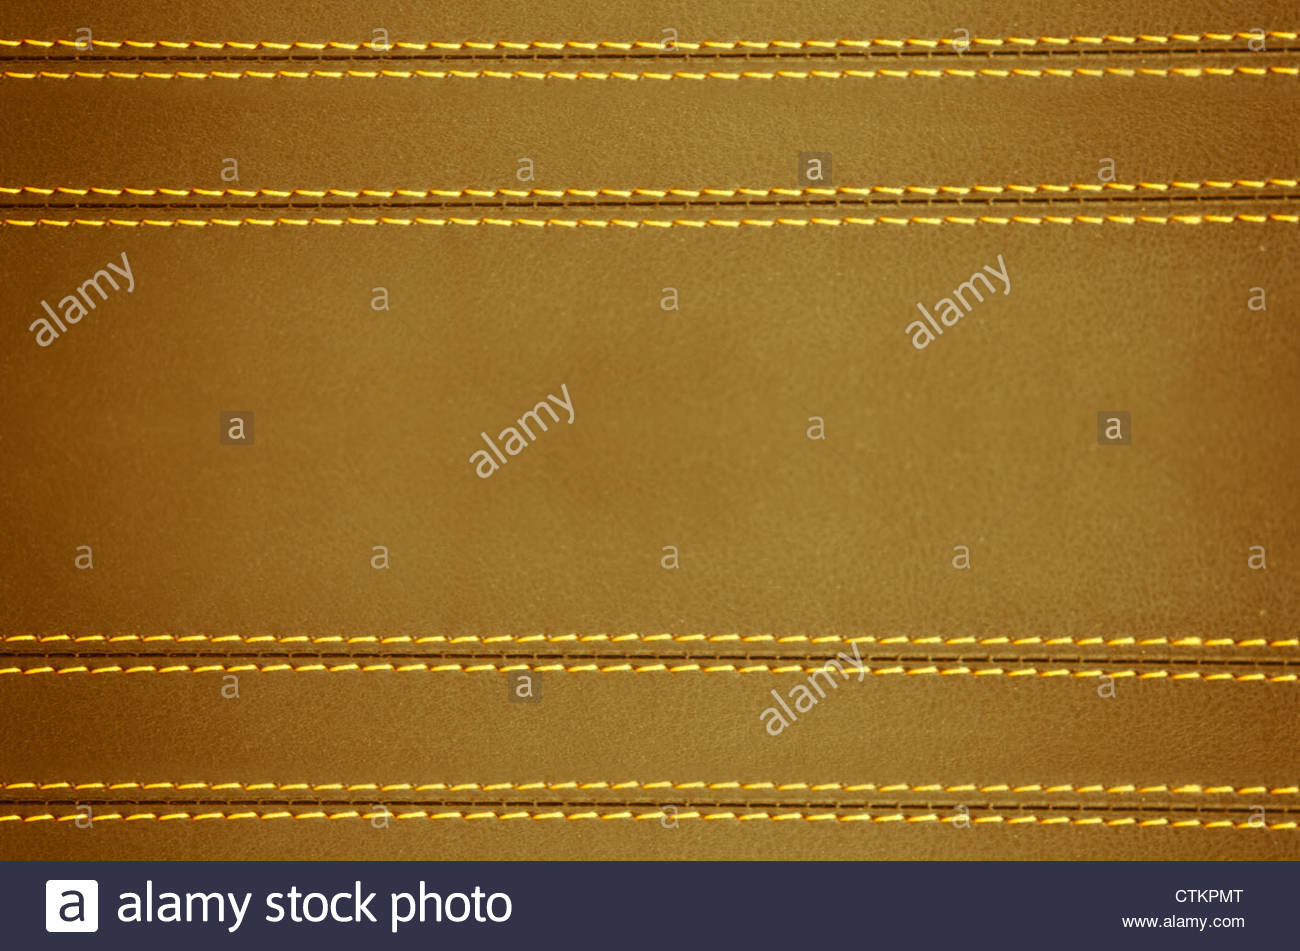 Brown Horizontal Stitched Leather Background Art Wallpaper Stock